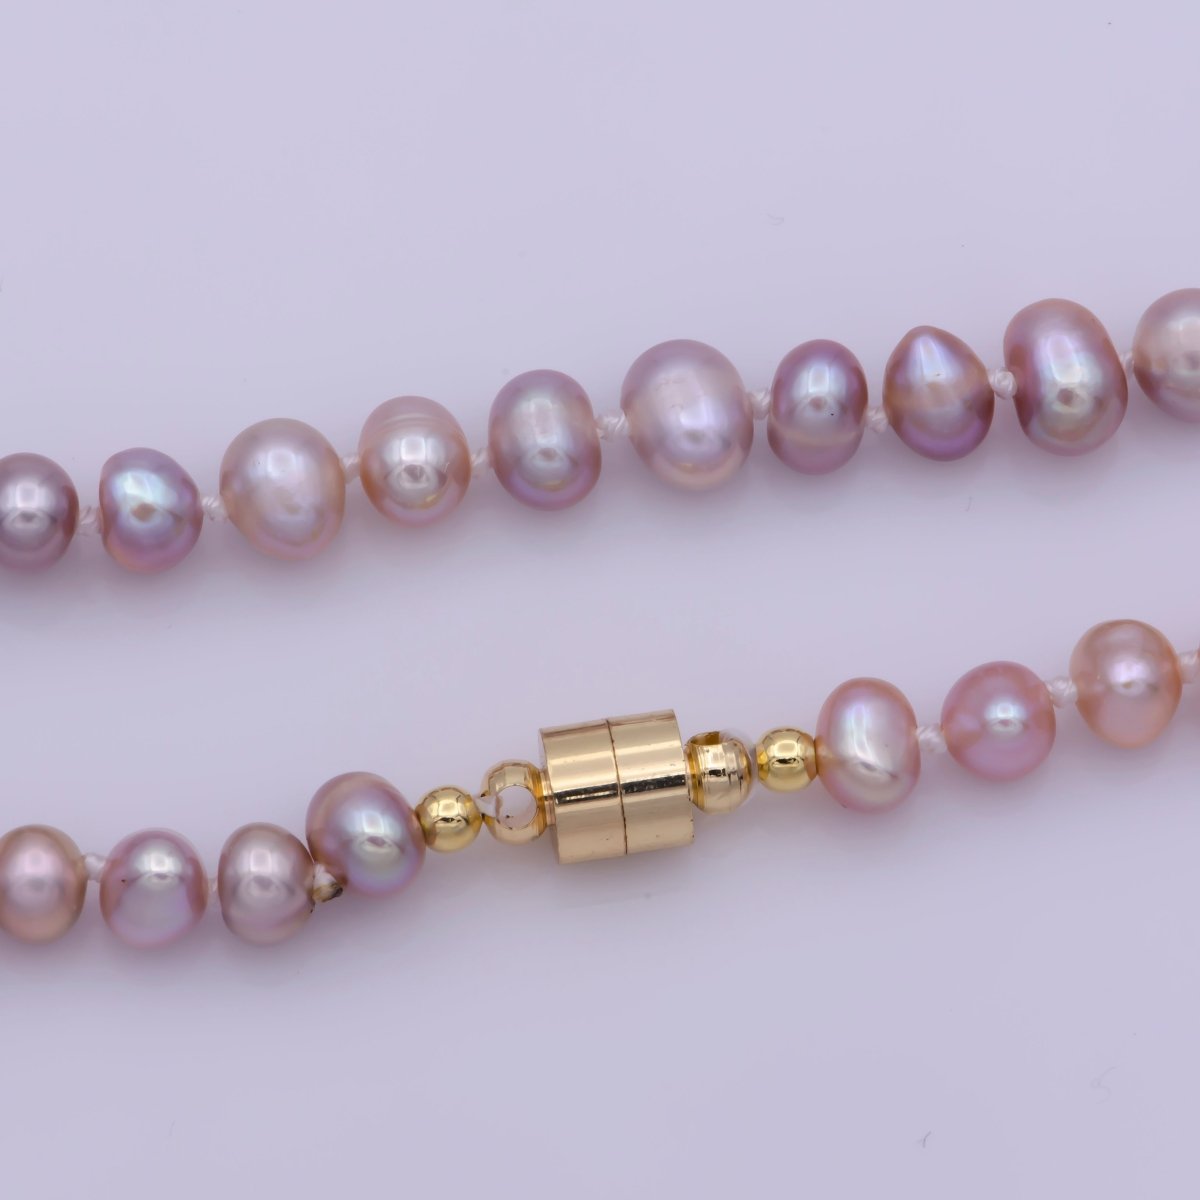 Real Pink Pearl Chocker Necklace Oval Freshwater Pearl Jewelry, Large Bead Light Pink Elegant Everyday Statement Piece 17 Inches WA-408 - DLUXCA